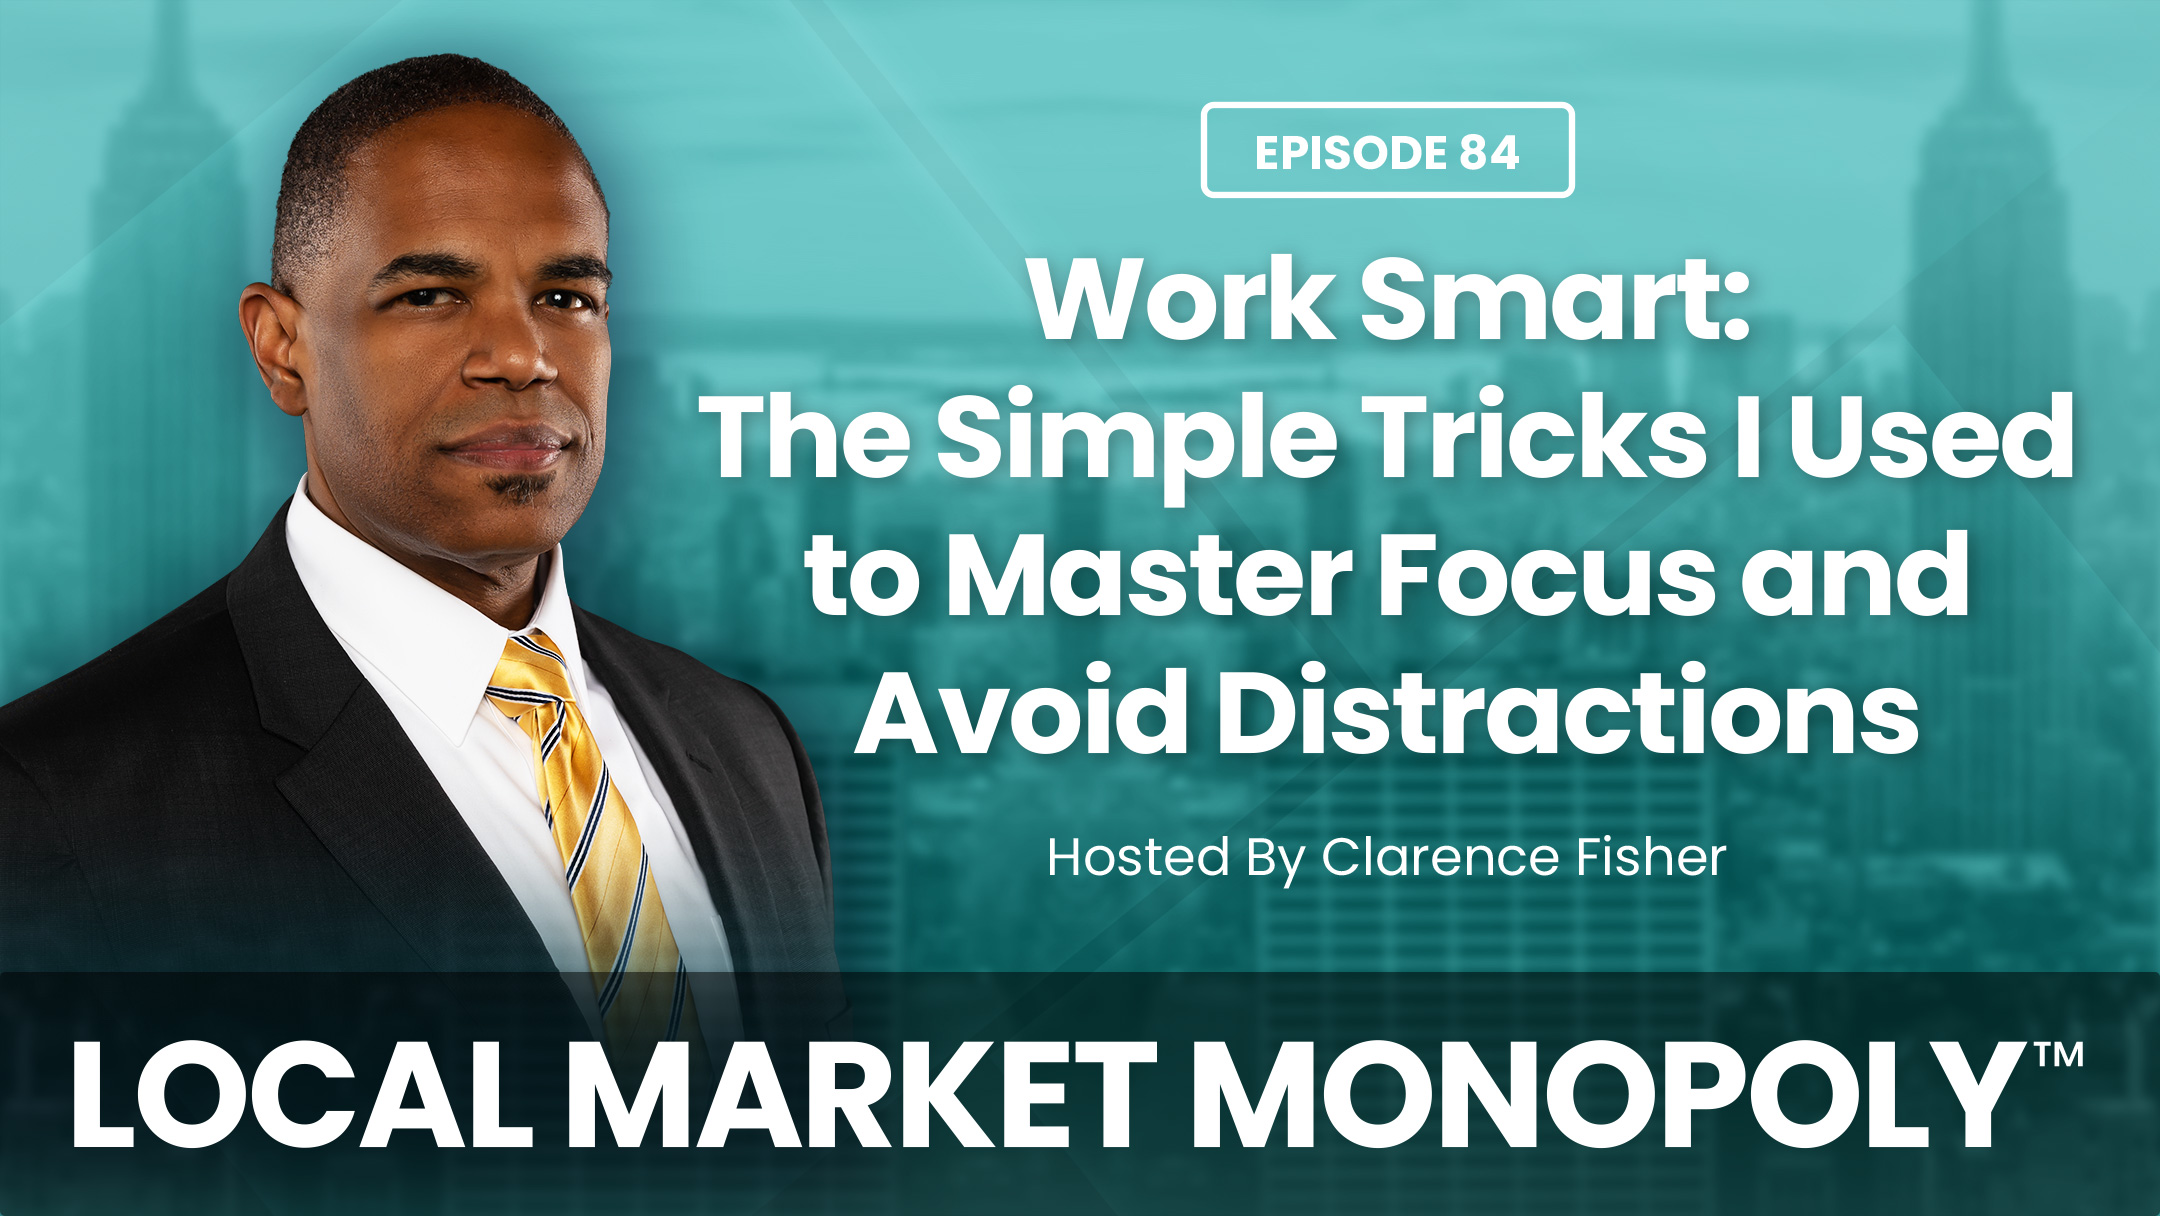 Work Smart: The Simple Tricks I Used to Master Focus and Avoid Distractions